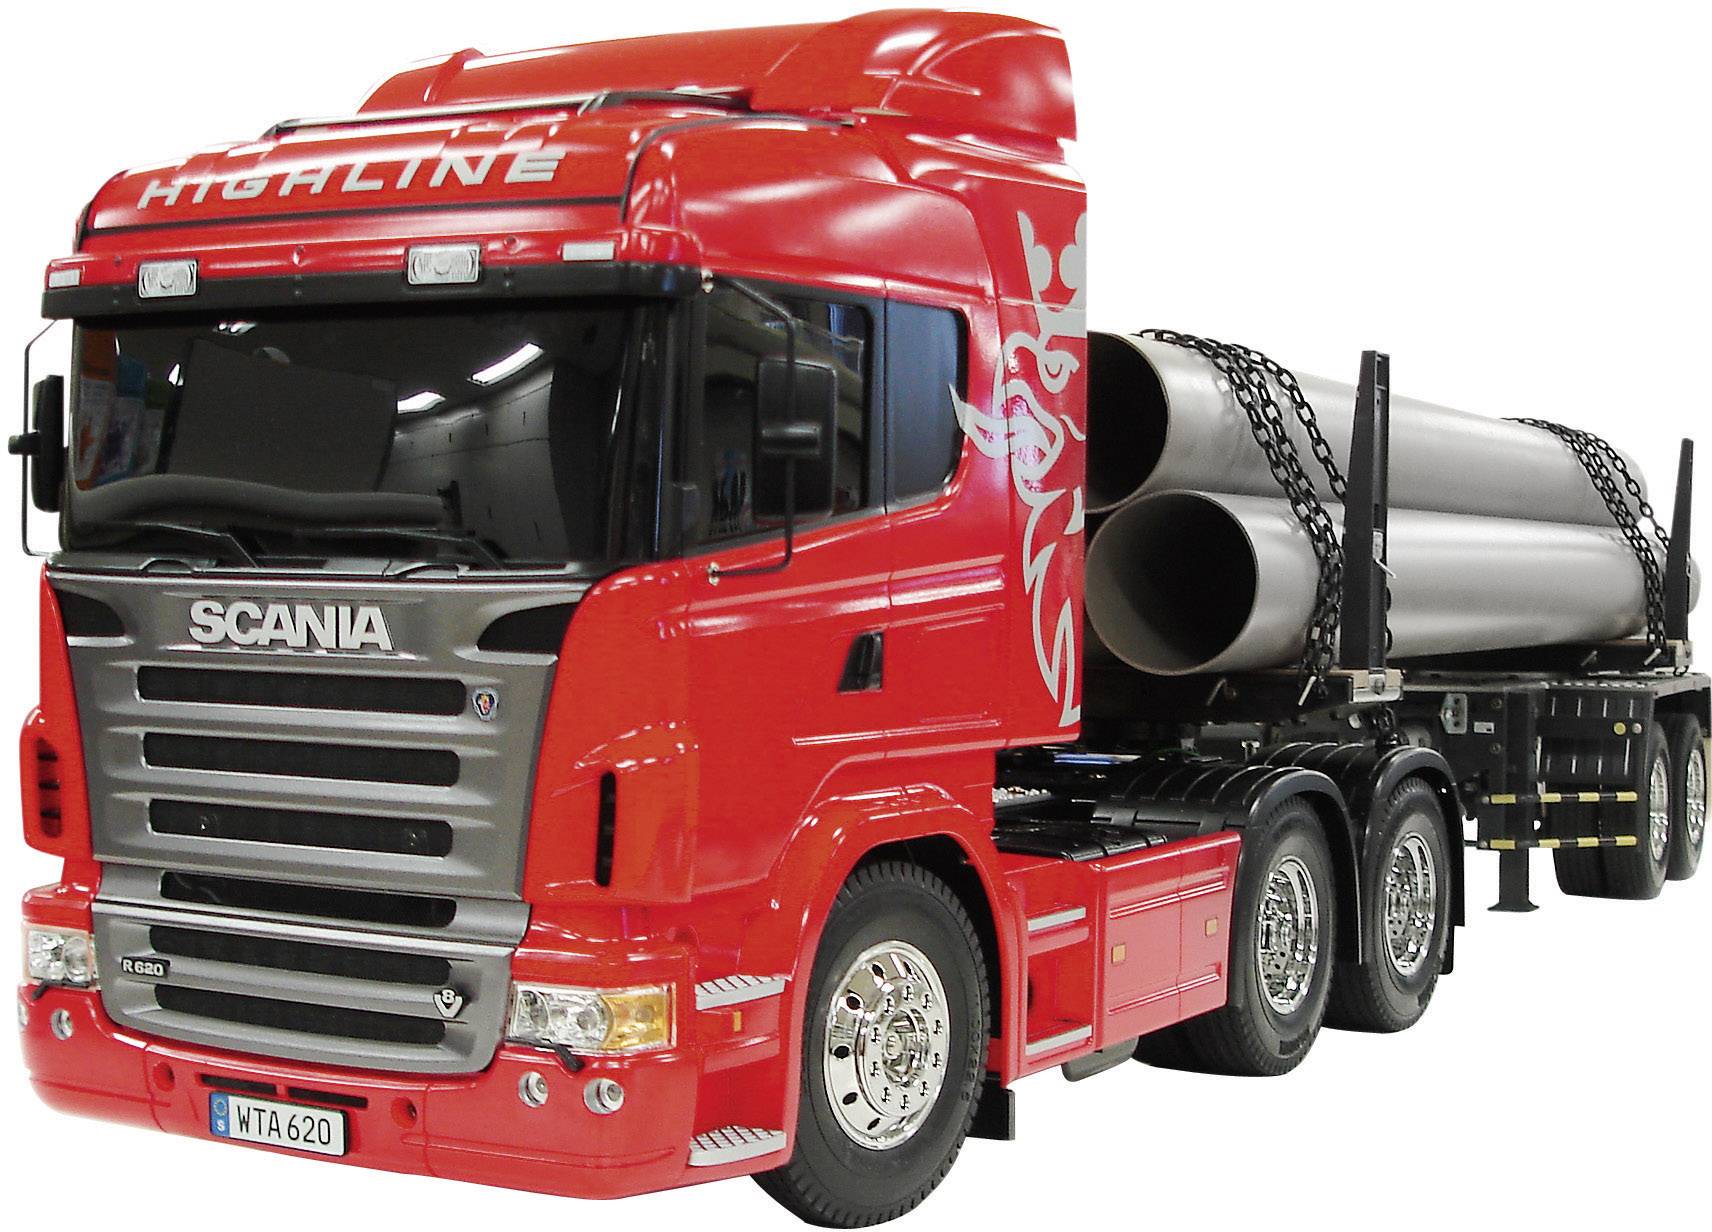 EB.0013A Toute Couleur Disponible. Tamiya 1/14 Scania Camion Extra pare-chocs Set 